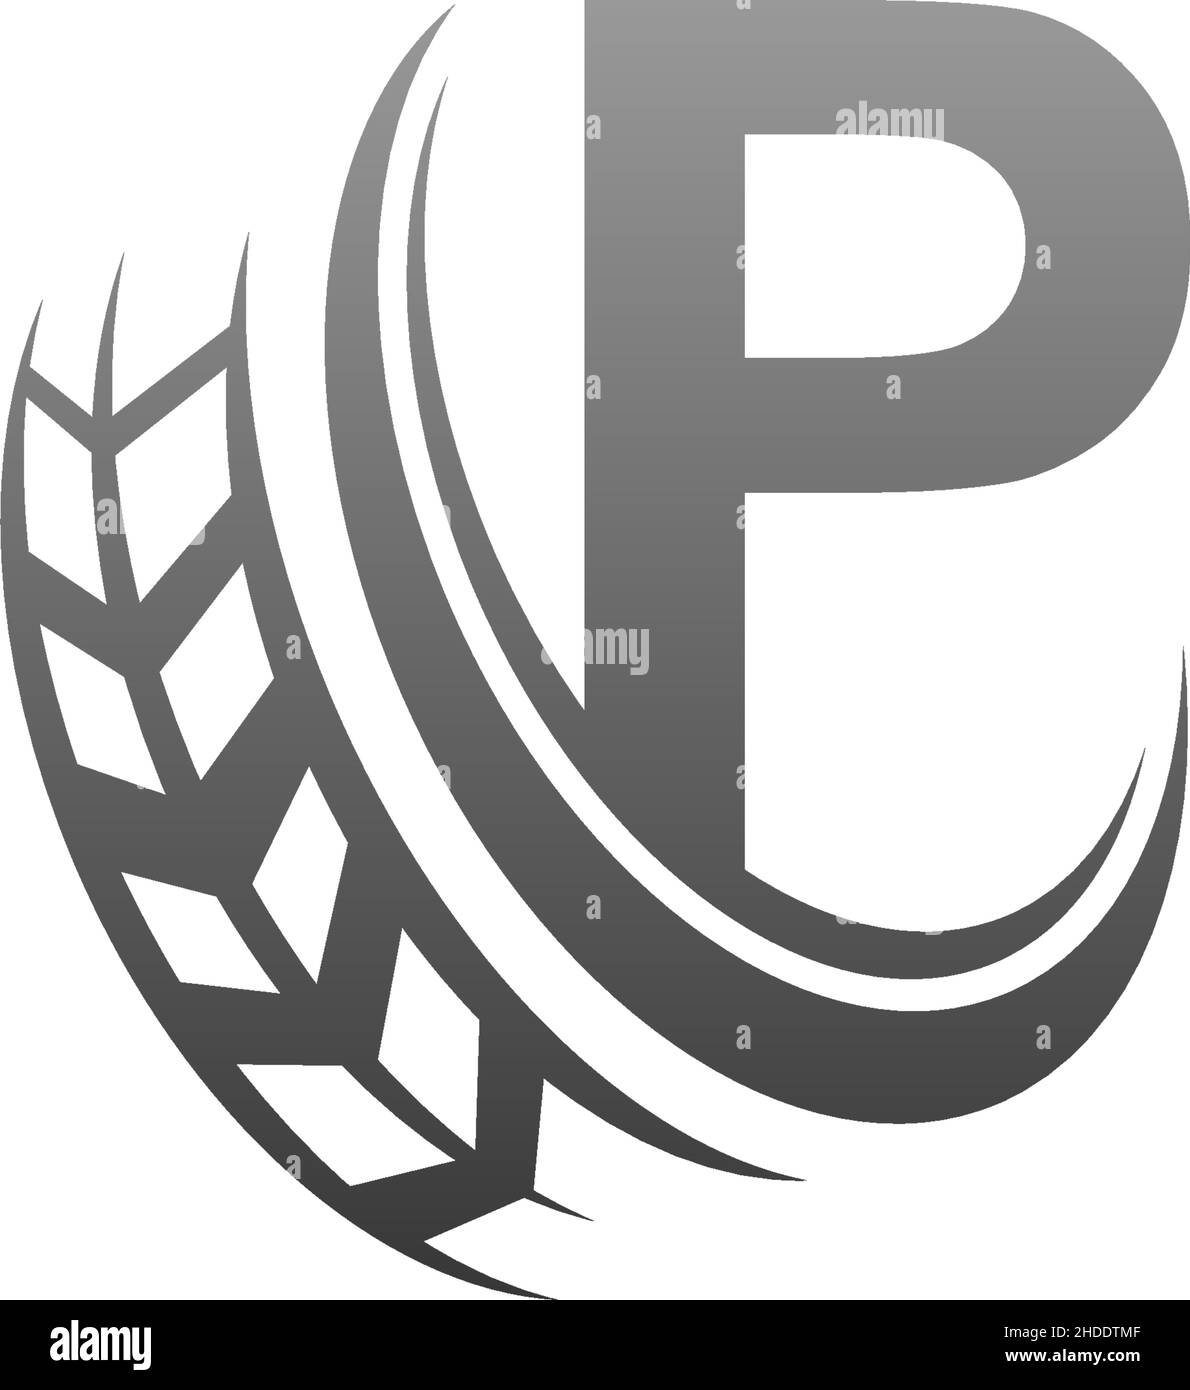 Letter P with trailing wheel icon design template illustration vector Stock Vector